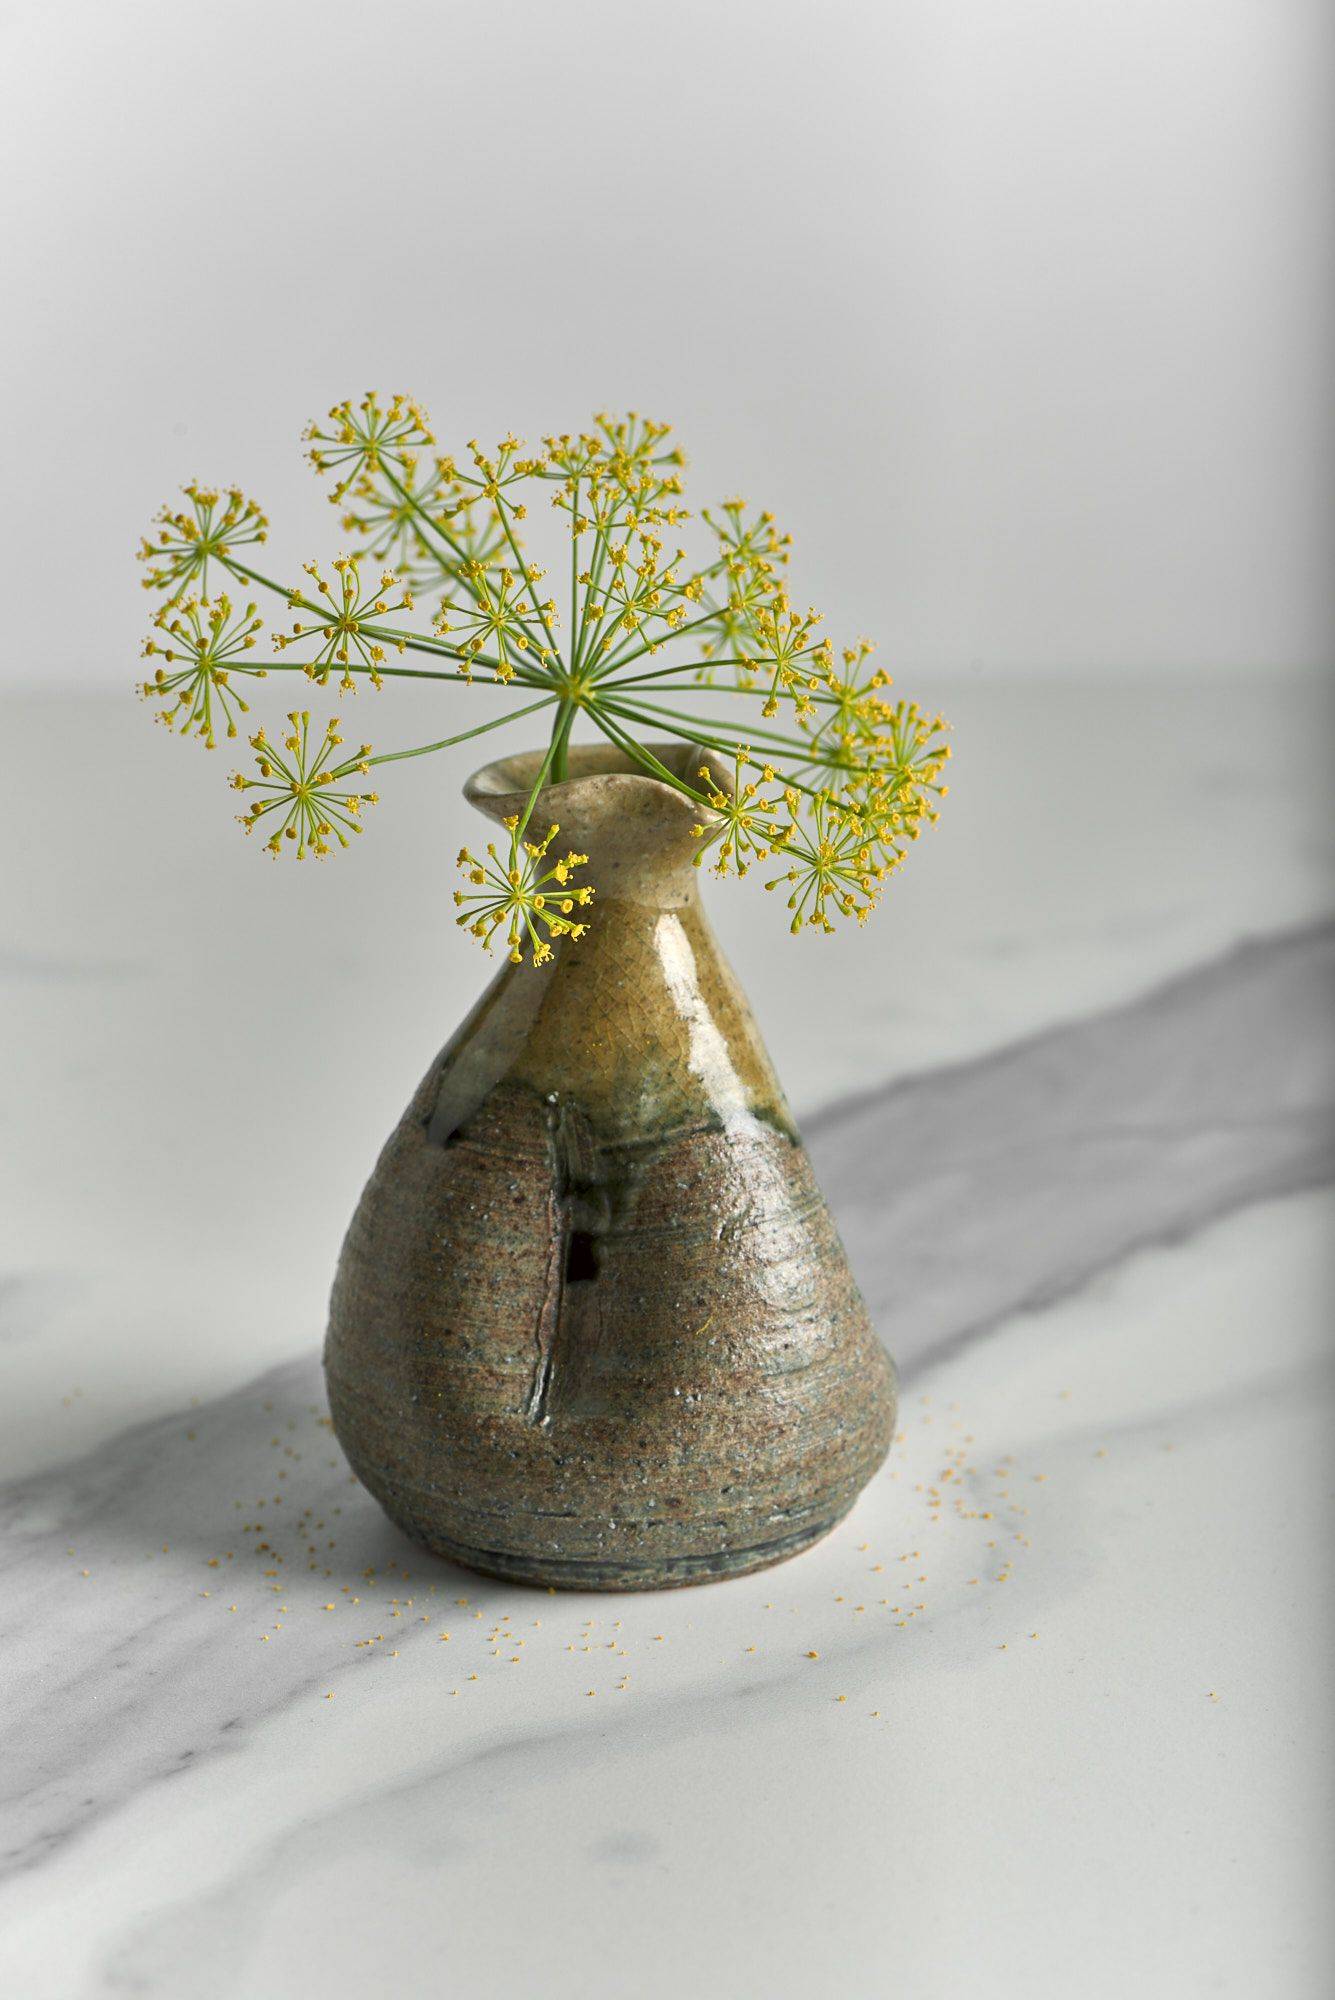 dill blossom in a ceramic vase with marbled sapienstone top